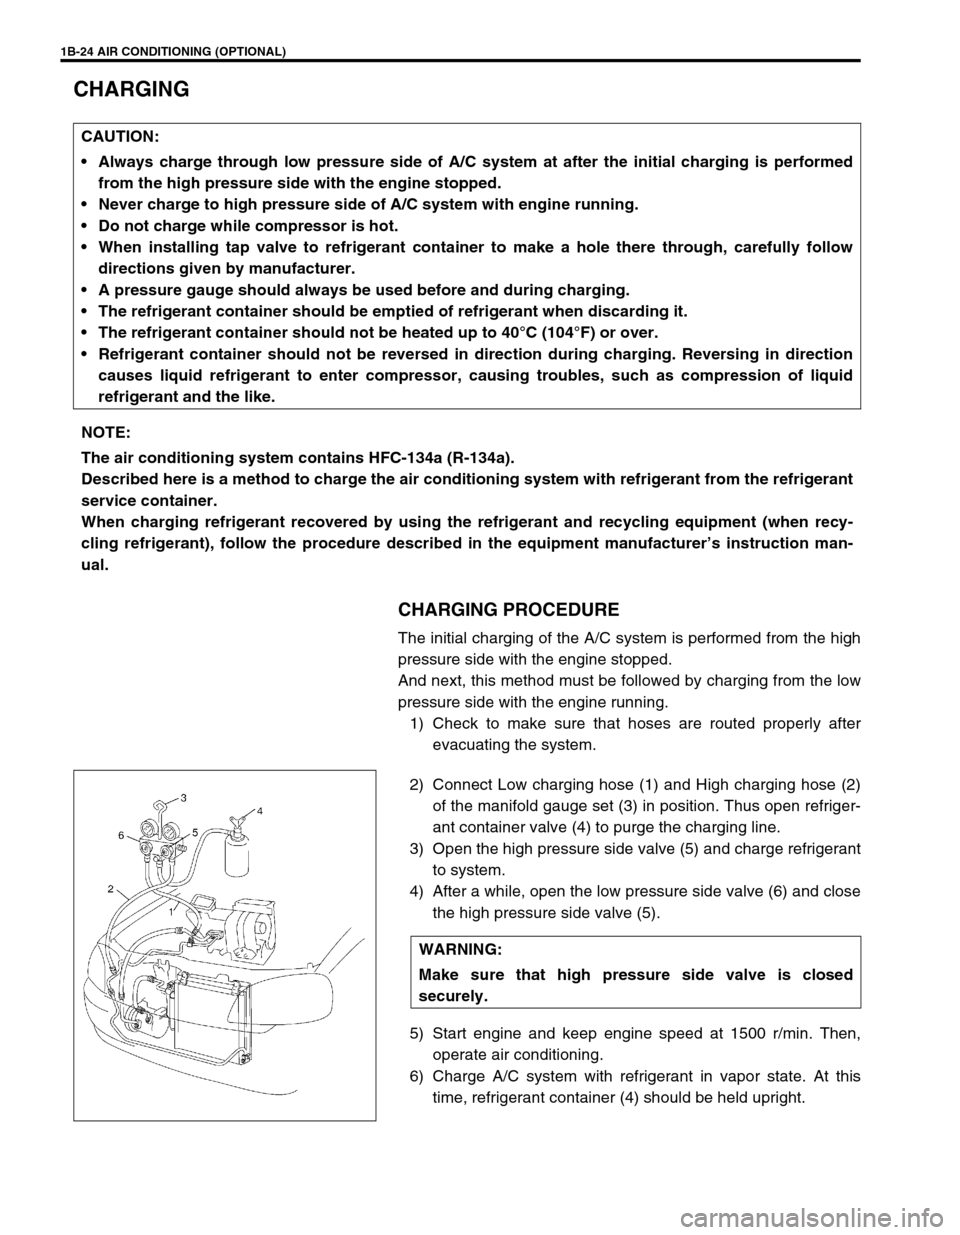 SUZUKI SWIFT 2000 1.G RG413 Service Workshop Manual 1B-24 AIR CONDITIONING (OPTIONAL)
CHARGING
CHARGING PROCEDURE
The initial charging of the A/C system is performed from the high
pressure side with the engine stopped.
And next, this method must be fol